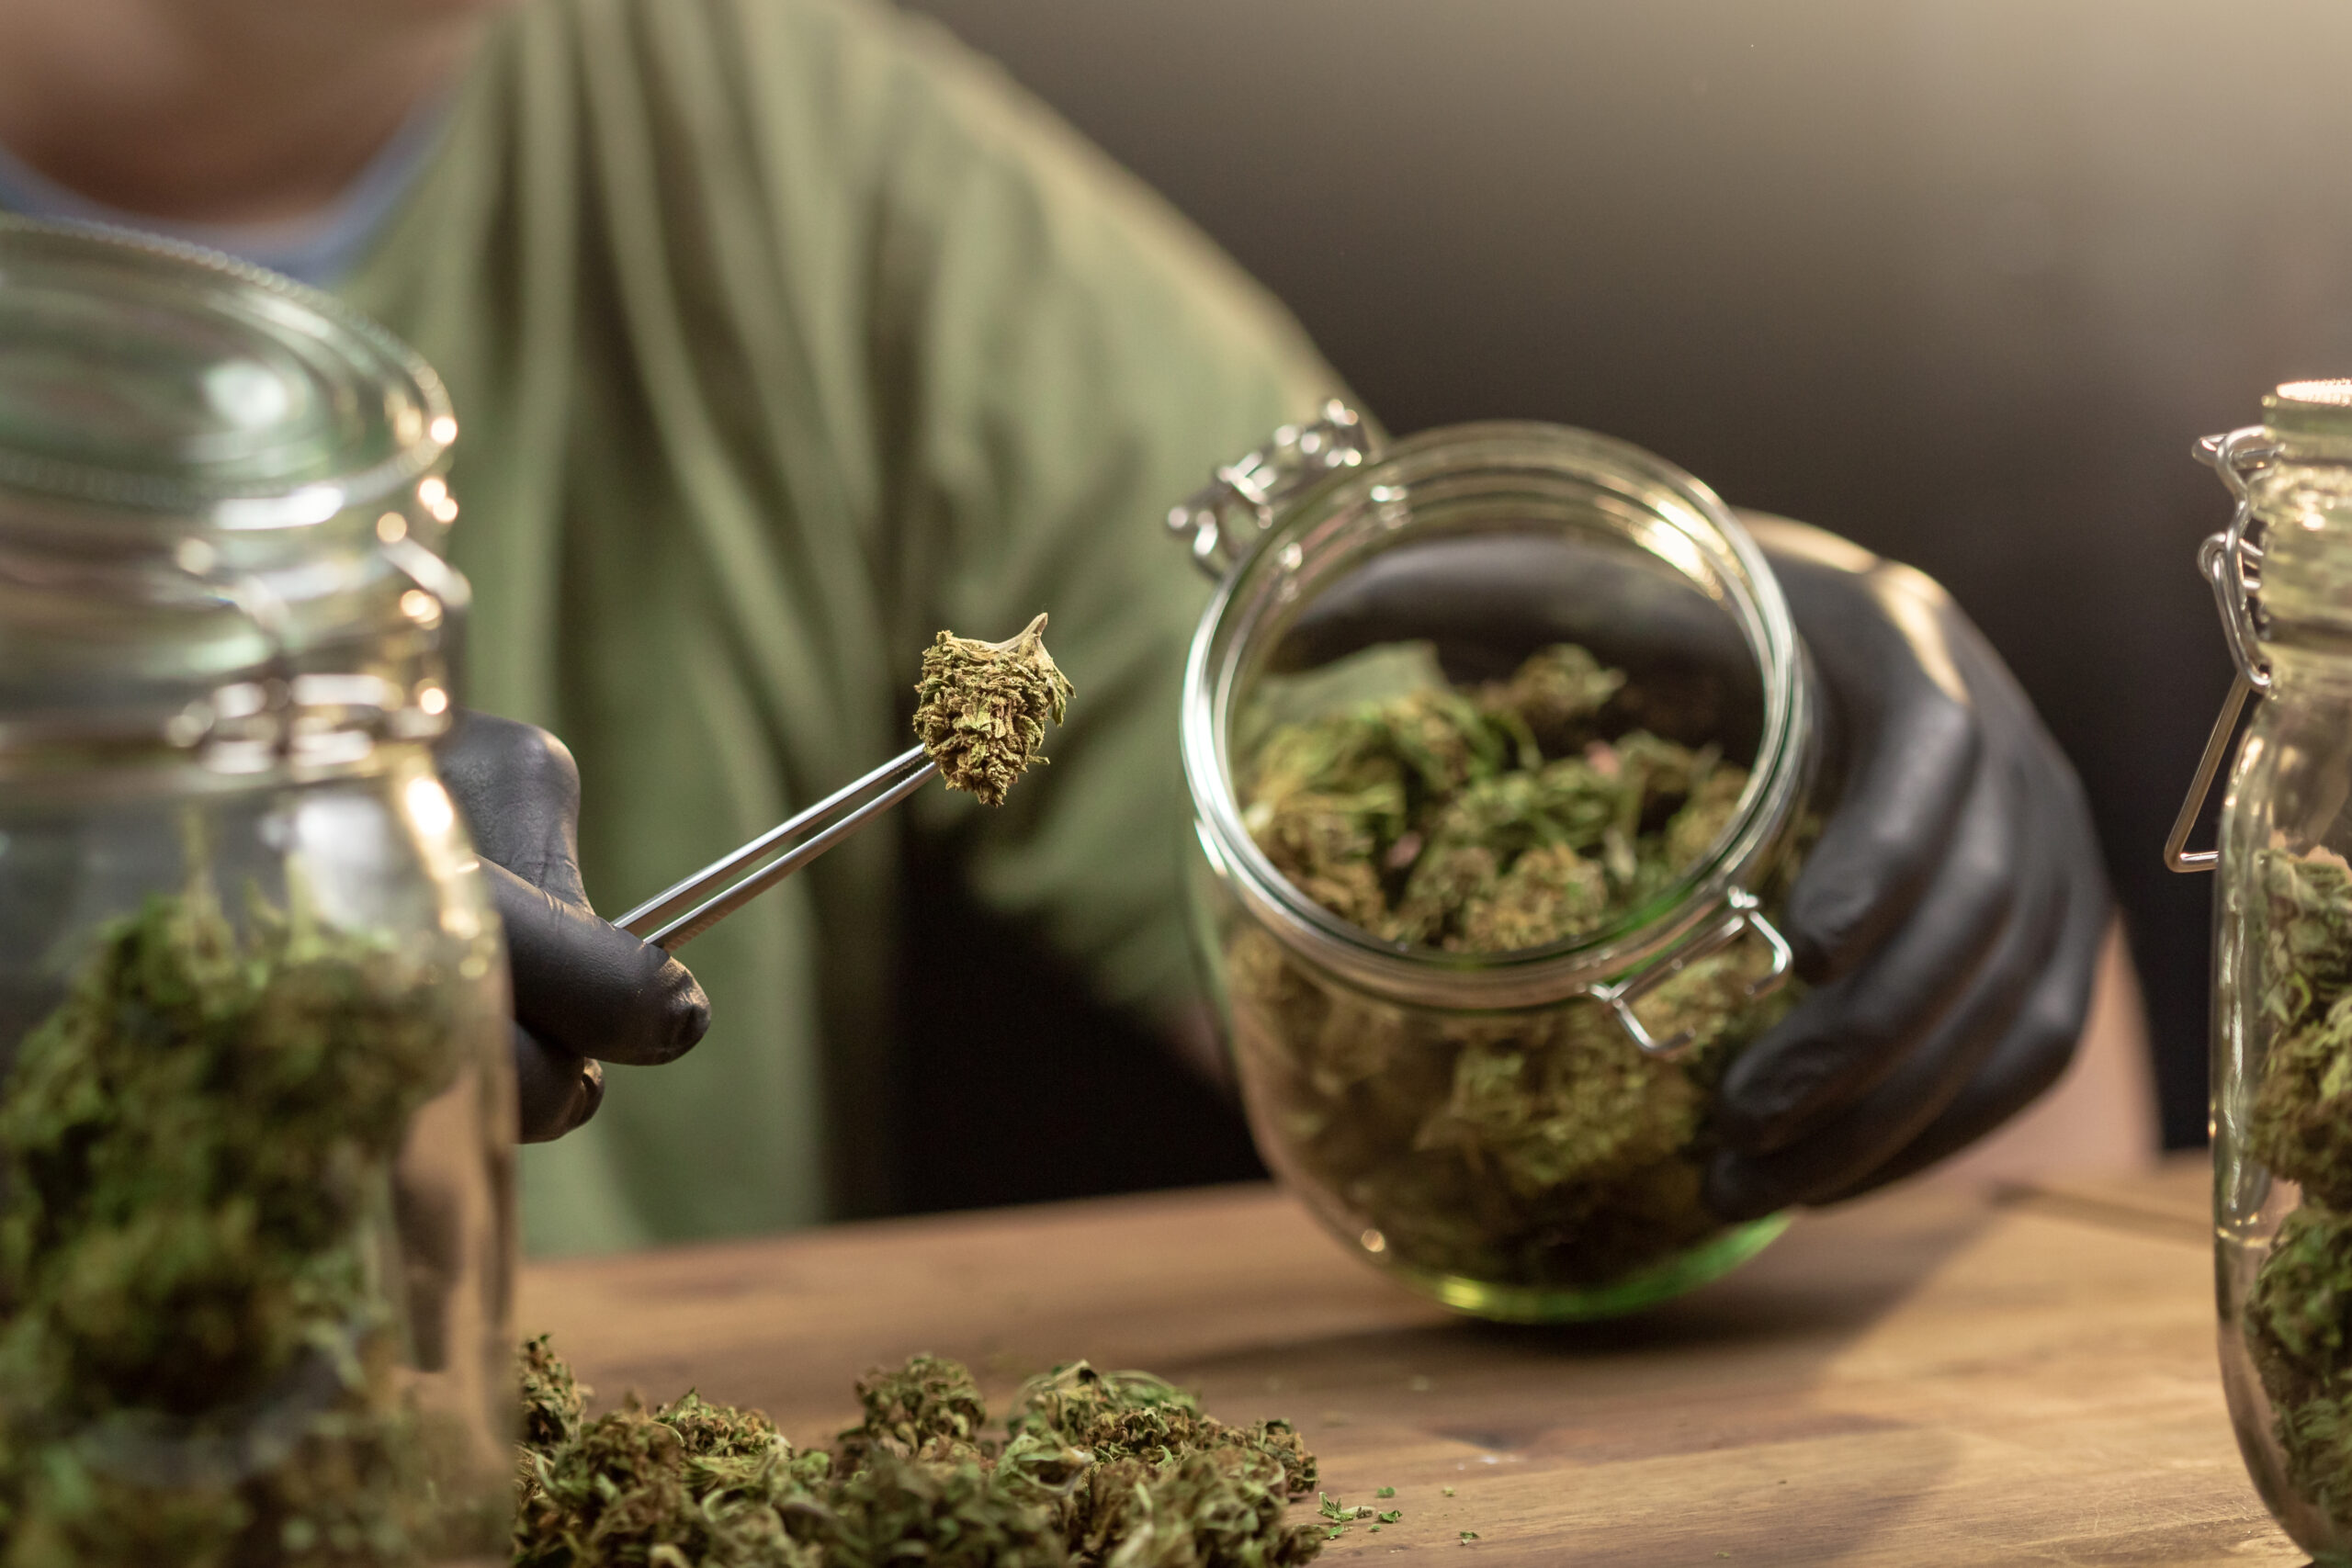 Hands placing trimmed weed buds in a glass jar